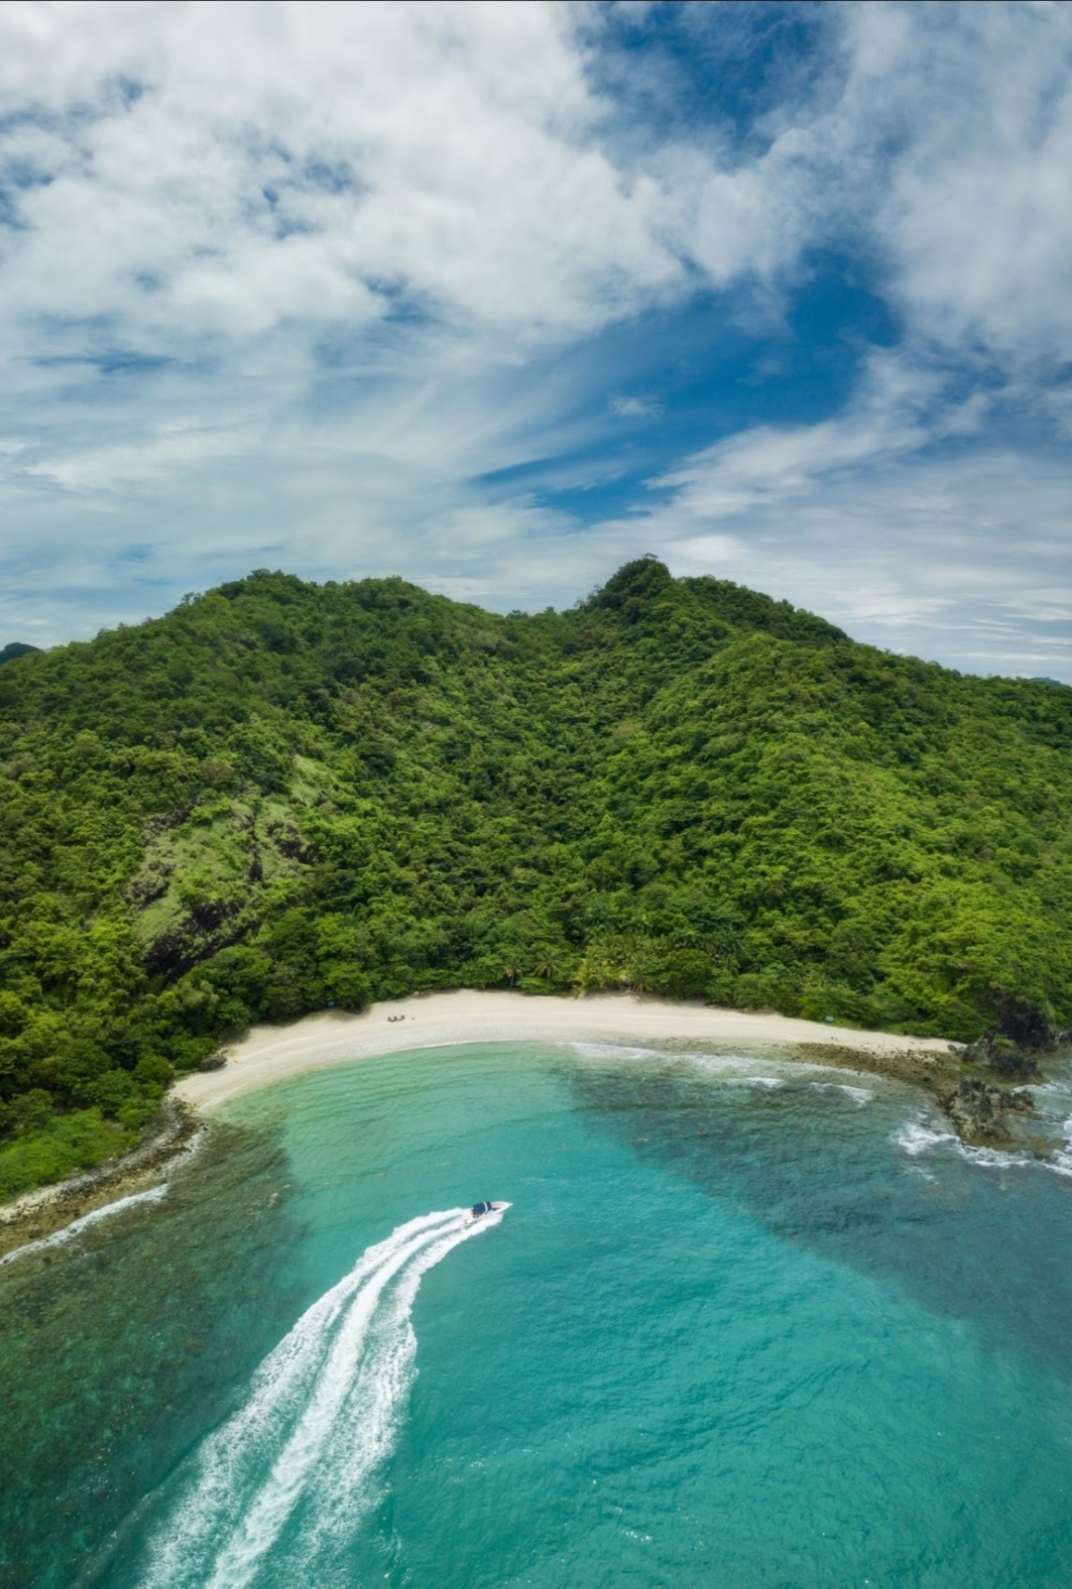 2  Santelmo Cove was among those declared as a Marine Protected Area (MPA) regarded as a coastal zone where human activities are strictly regulated to ensure their long-term conservation.